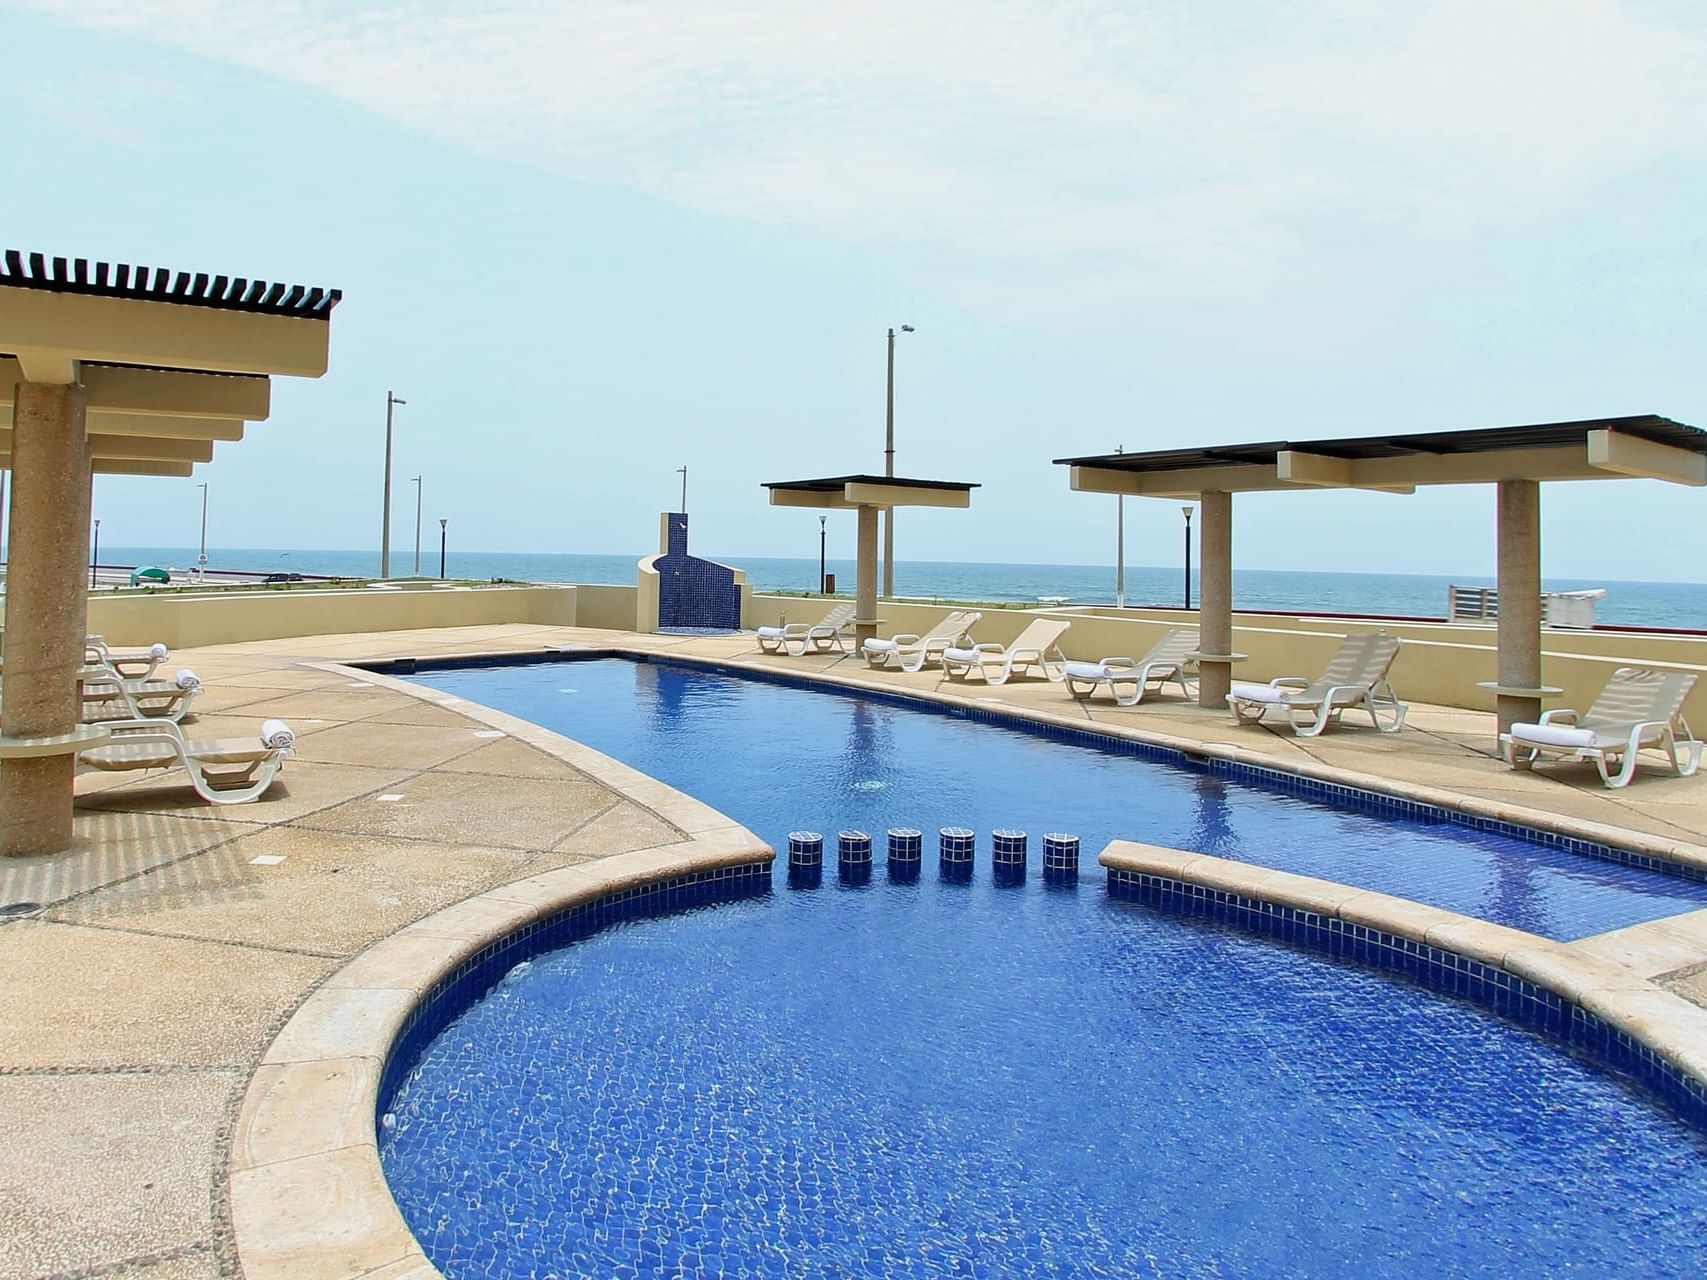 Outdoor swimming pool area with sunbeds at Fiesta Inn Hotels